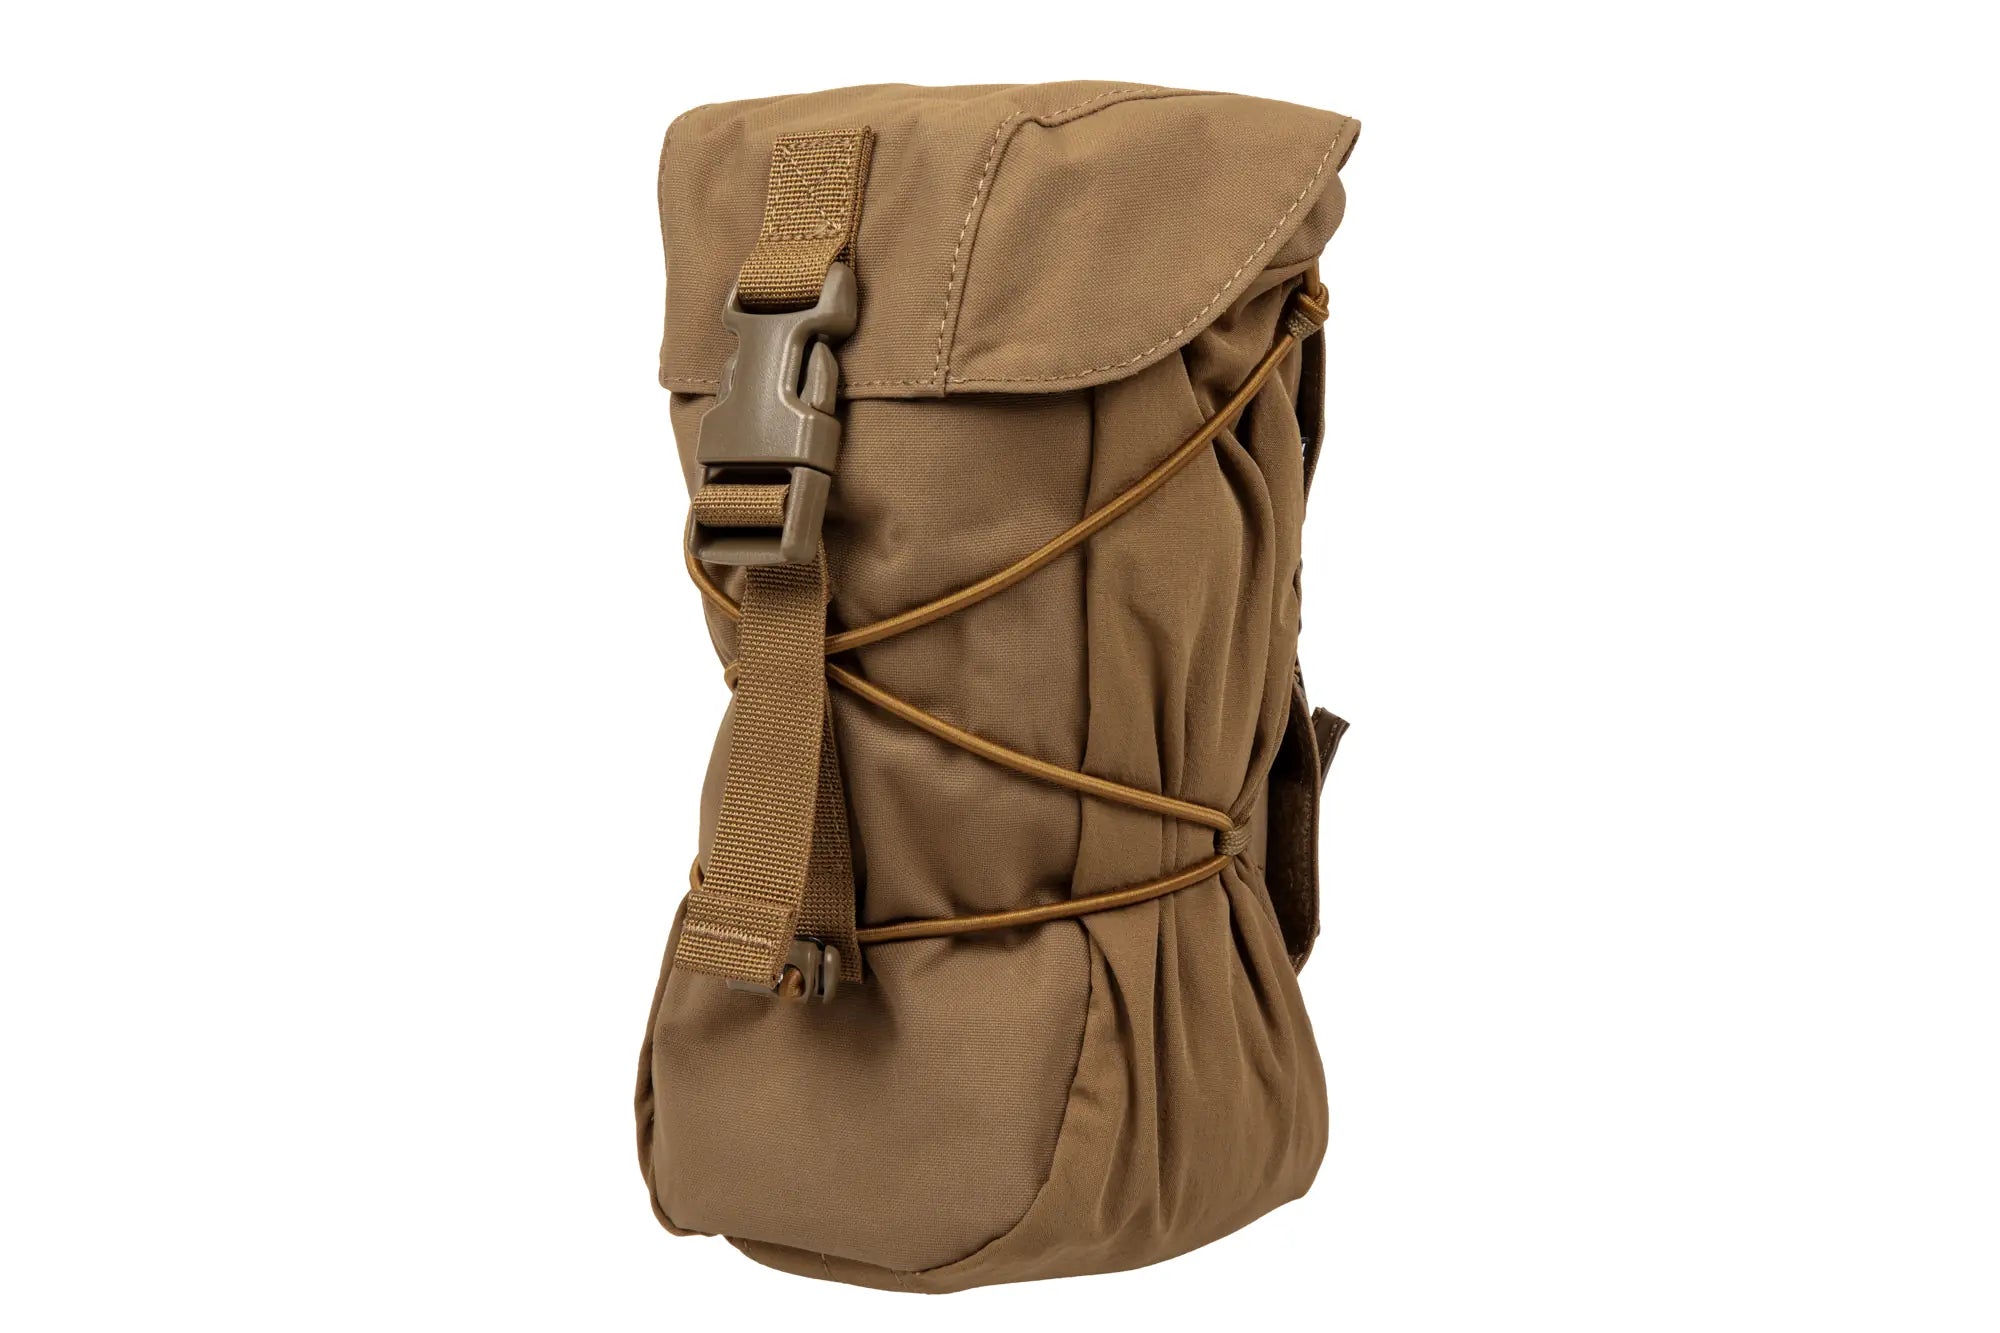 Chelon multifunctional accessory pocket - Coyote Brown-4